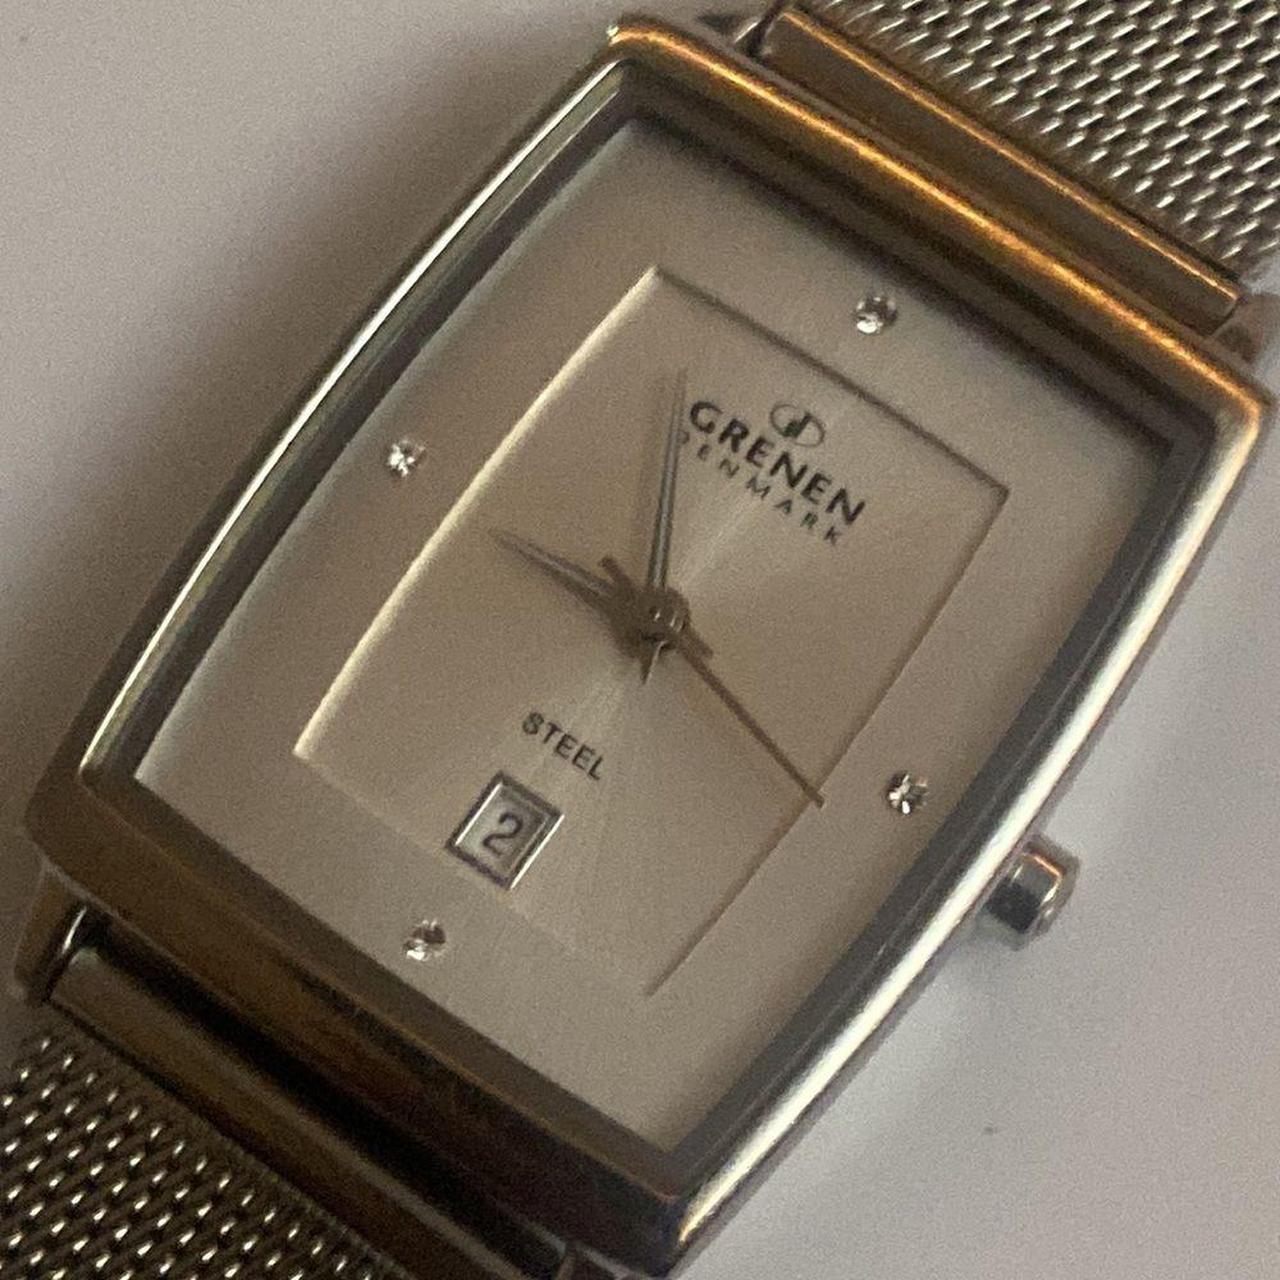 Product Image 3 - Watch is in excellent condition.